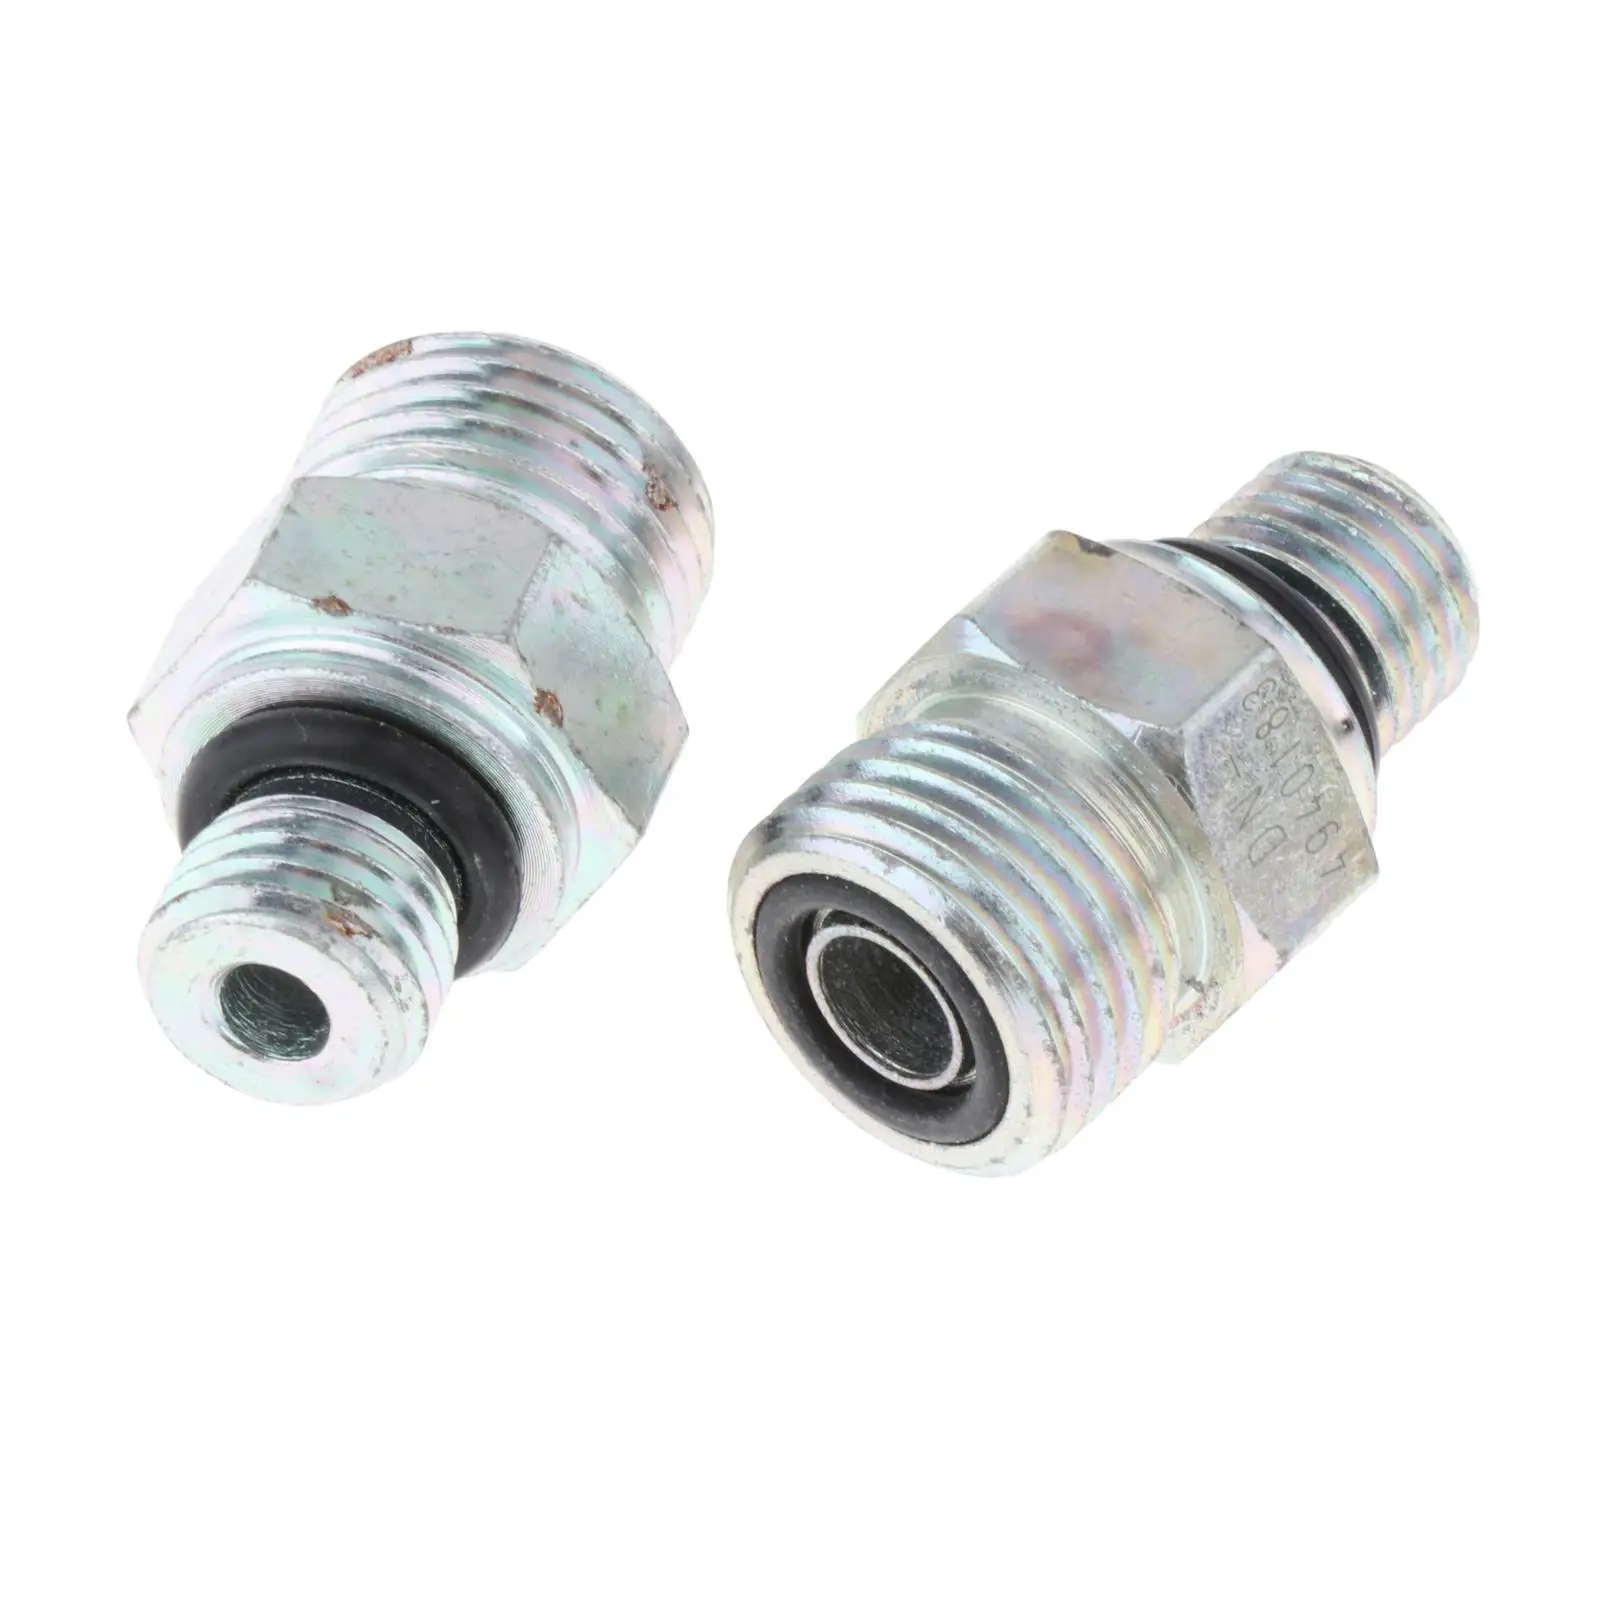 2 Pieces with O Rings Easy Installation Iron Accessories Hardware Connectors Joints for Car Vehicle Auto Parts Engine Parts